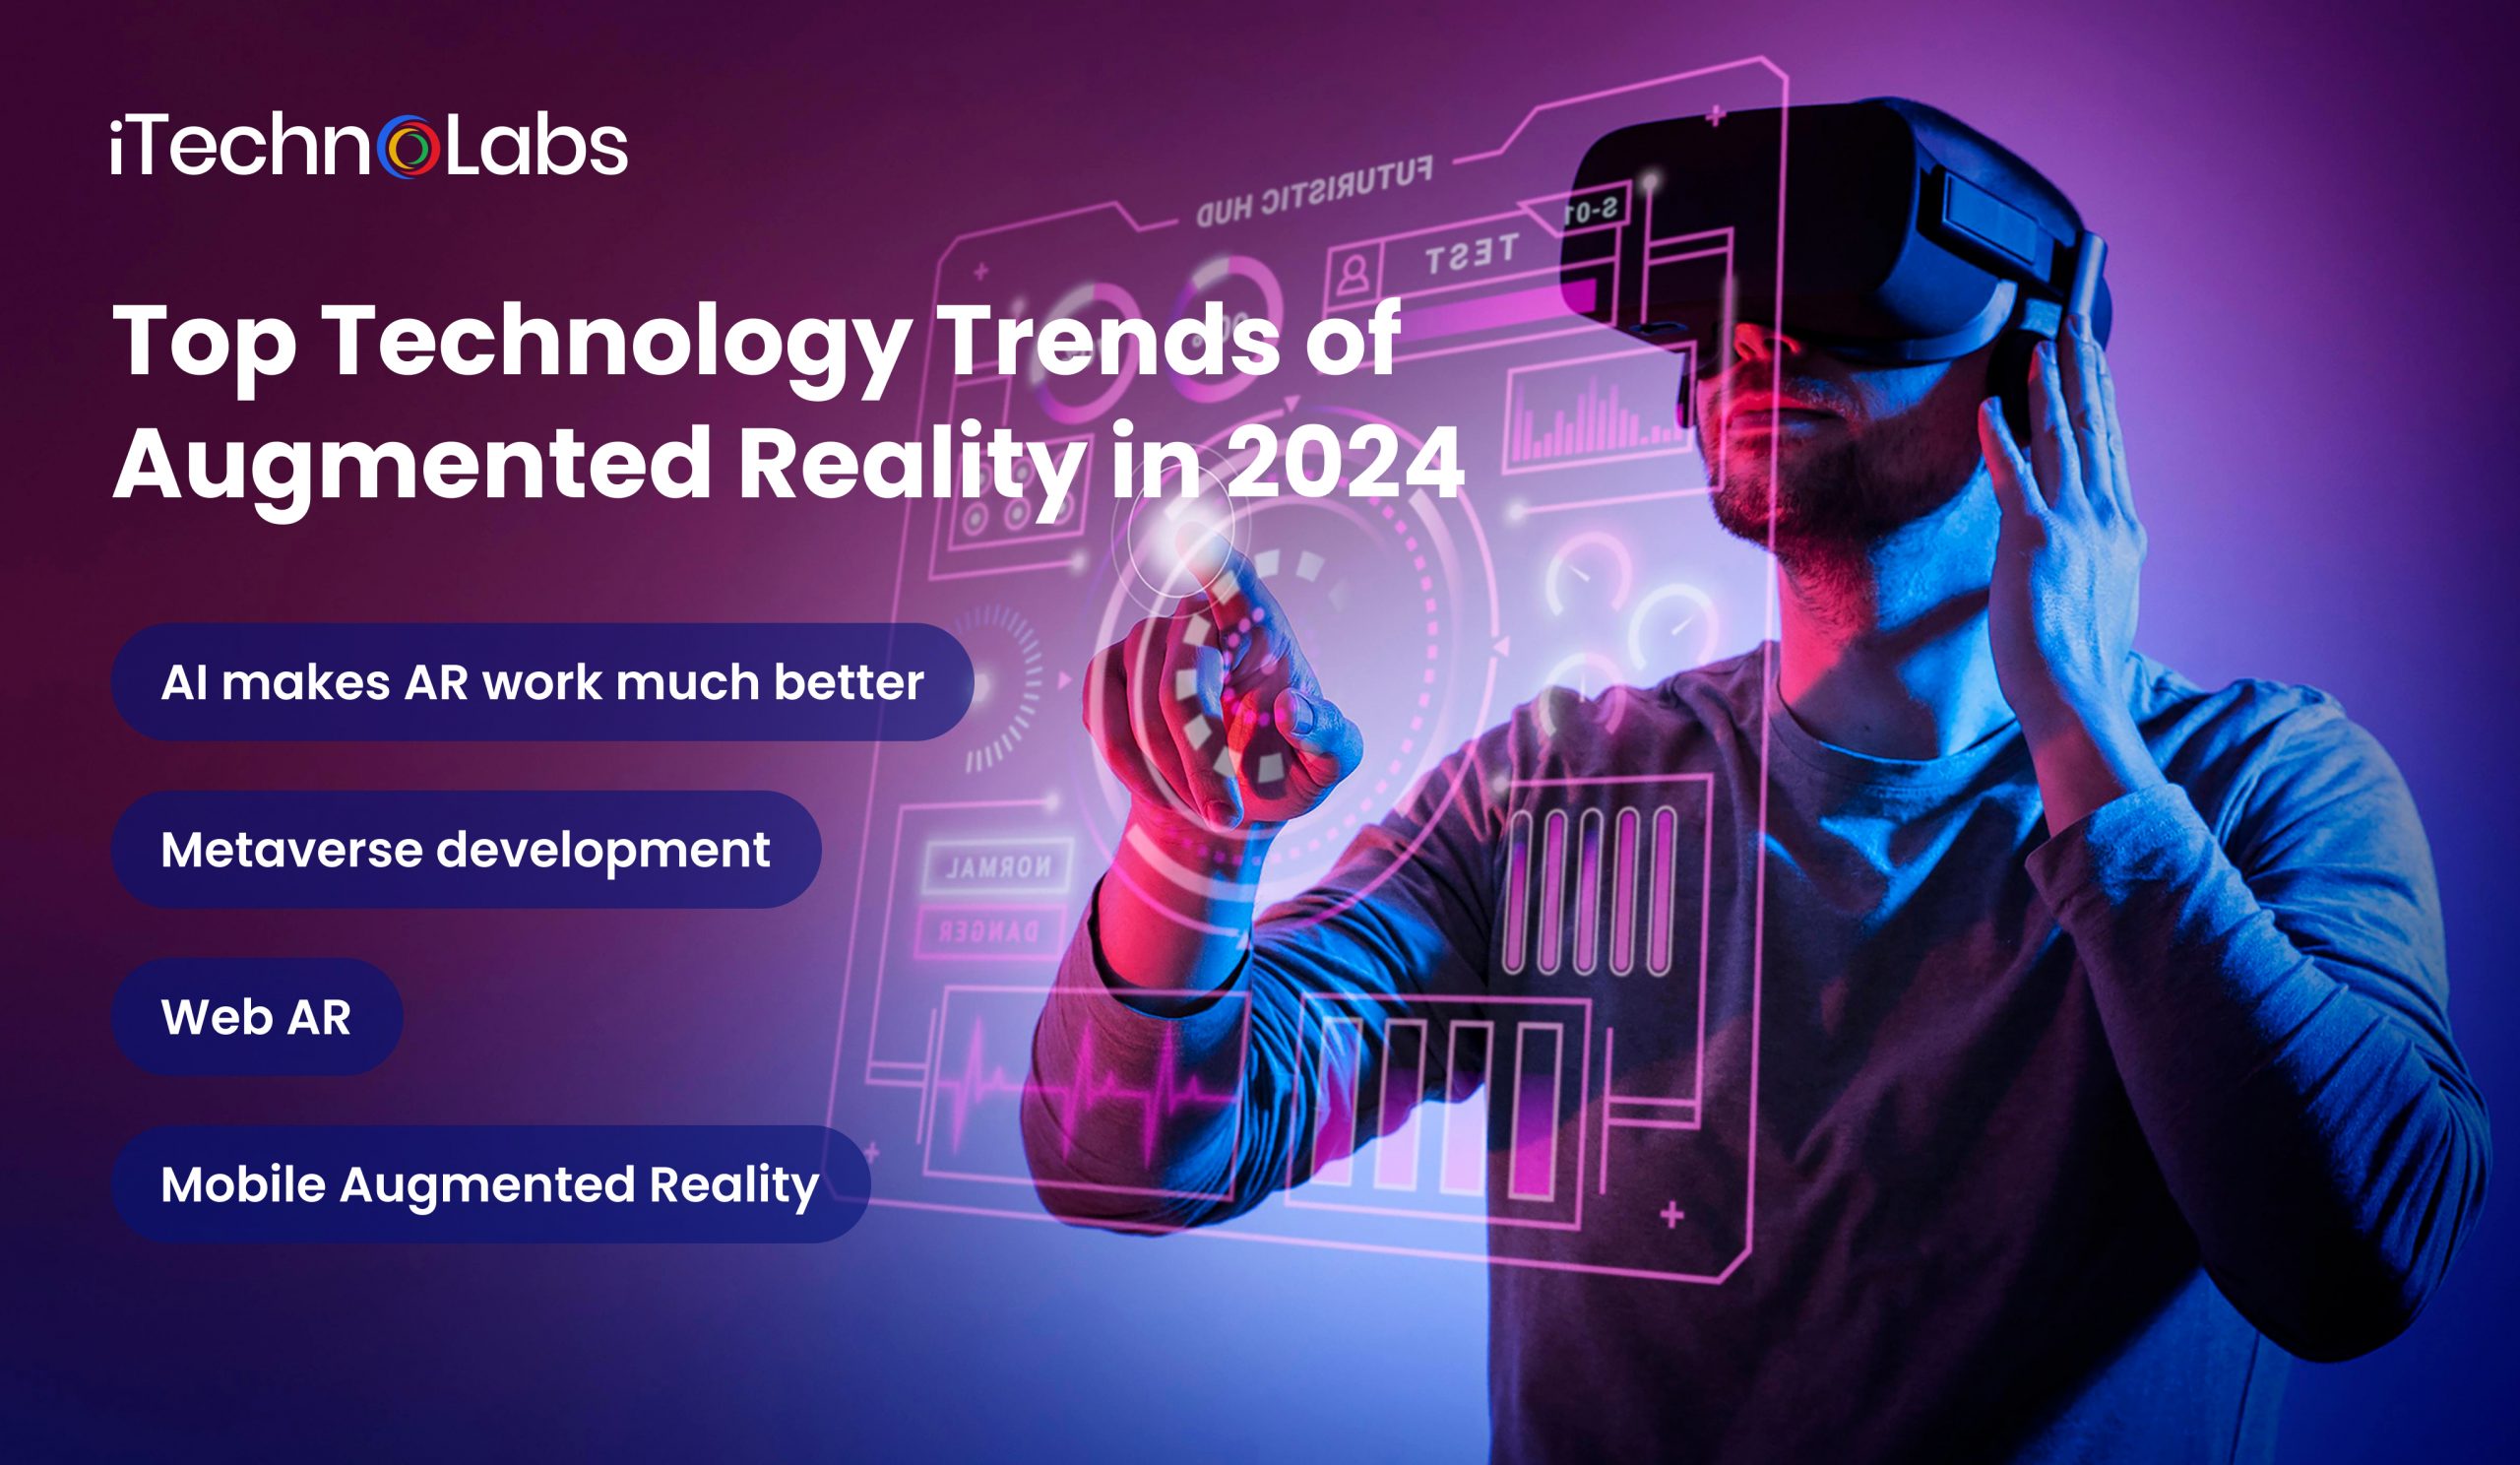 iTechnolabs-Top Technology Trends of Augmented Reality in 2024